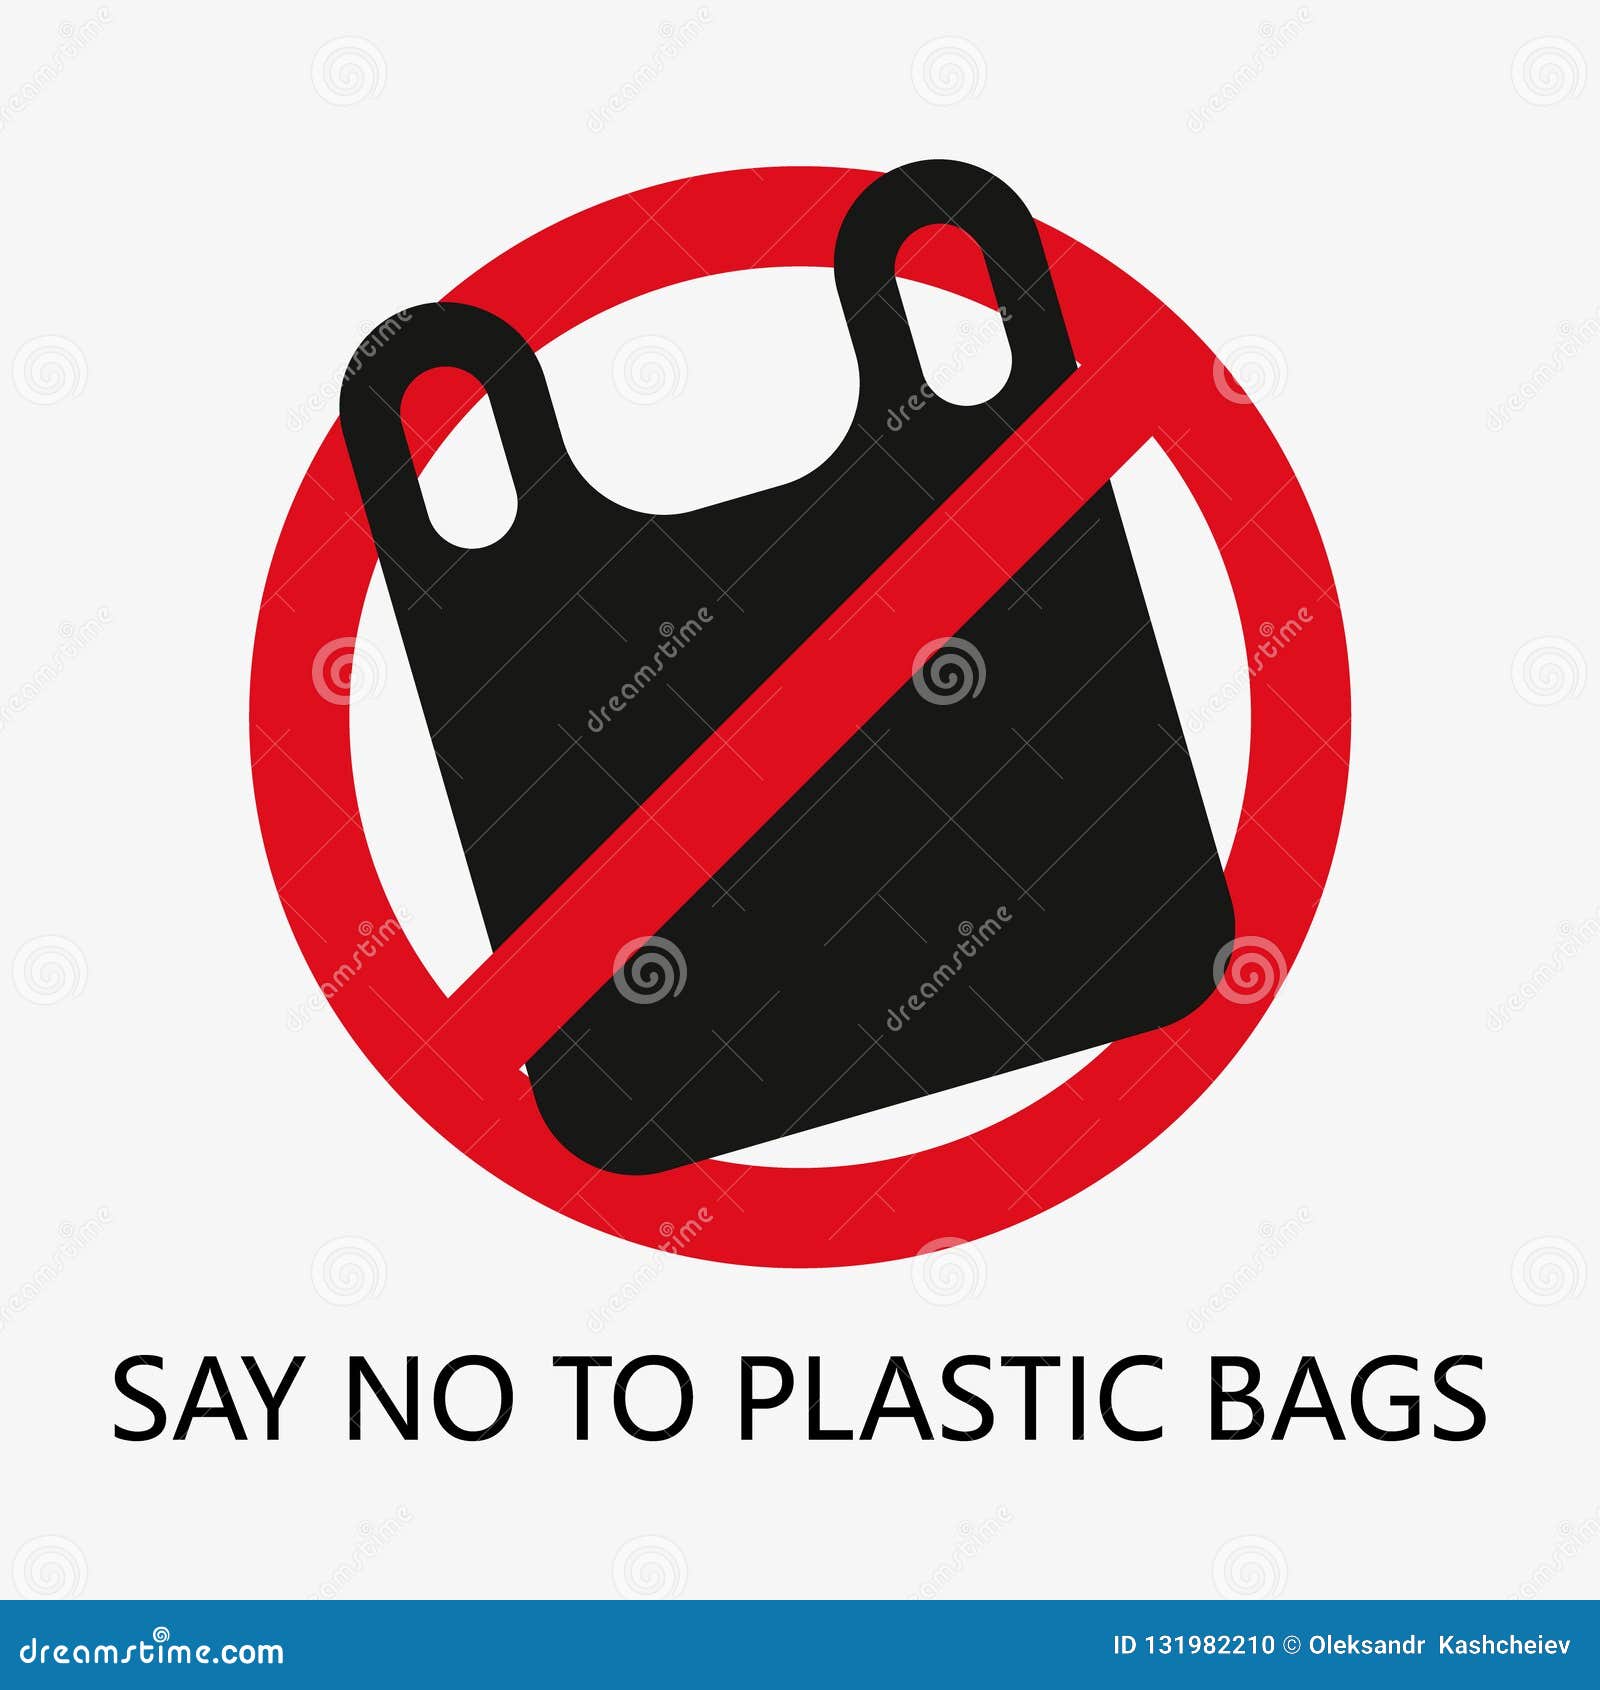 Say No To Plastic Bags. Cartoon Styled Images with Signage Calling for ...